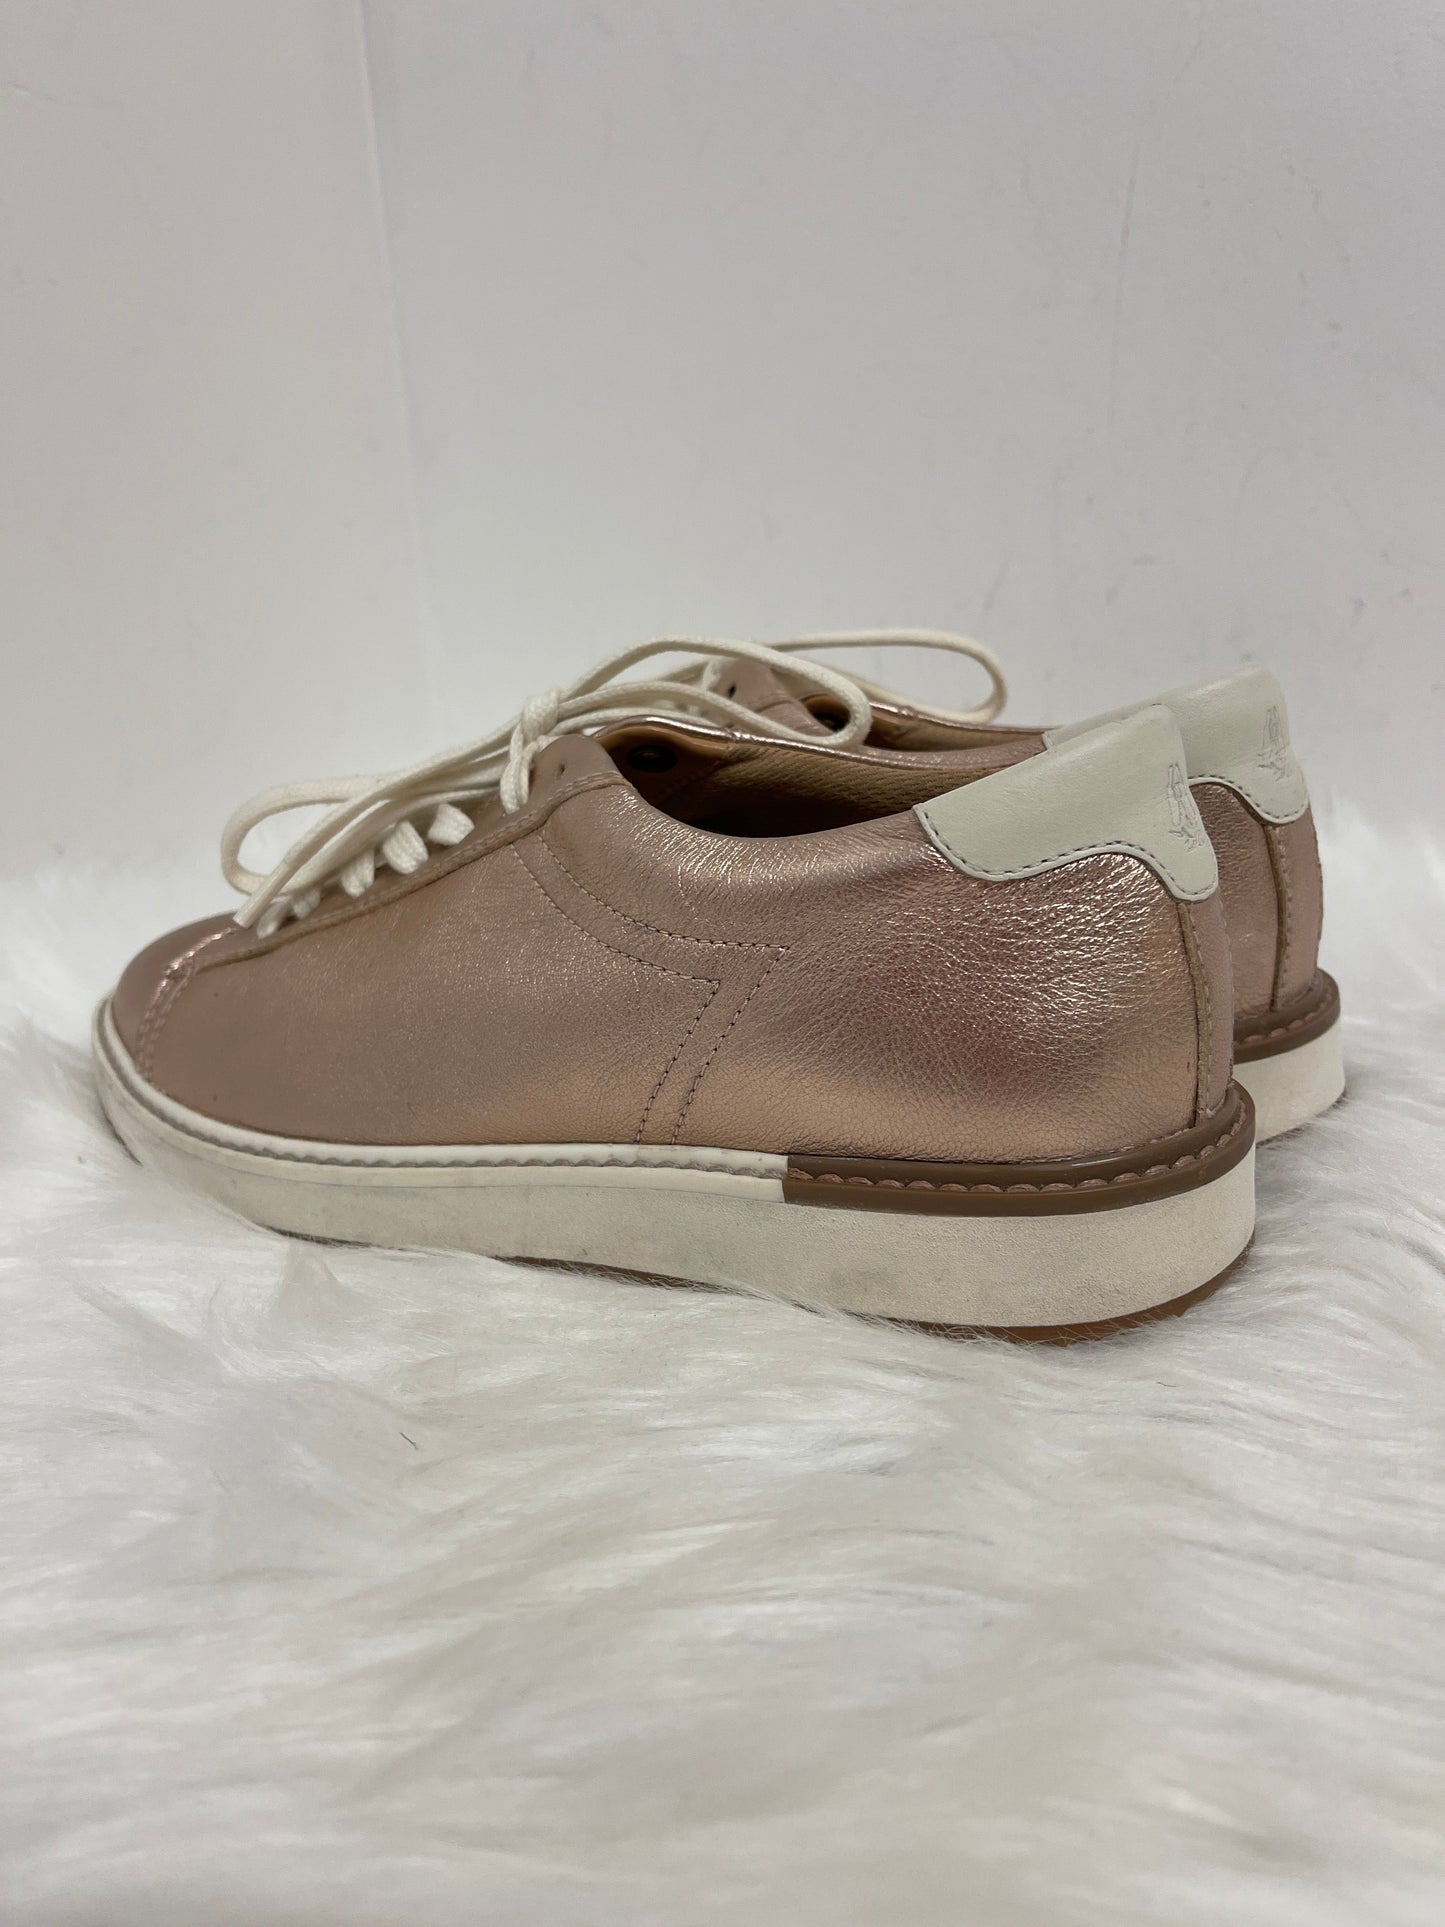 Rose Gold Shoes Sneakers Hush Puppies, Size 8.5